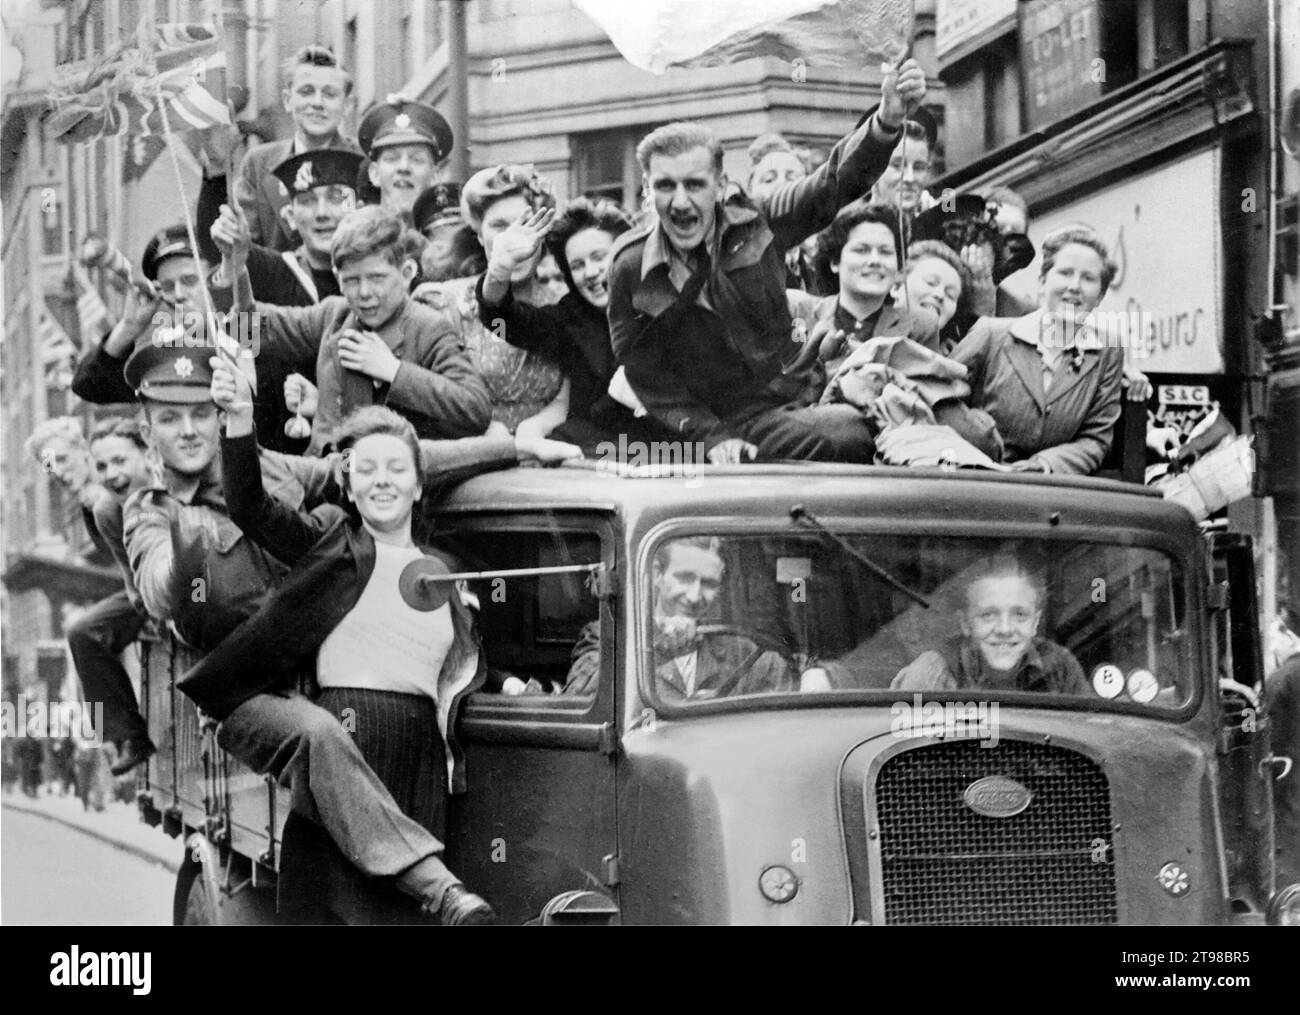 VE Day. Crowd of people on a truck in the Strand, London on V-E Day after the announcement of the German surrender, 8th May 1945 Stock Photo